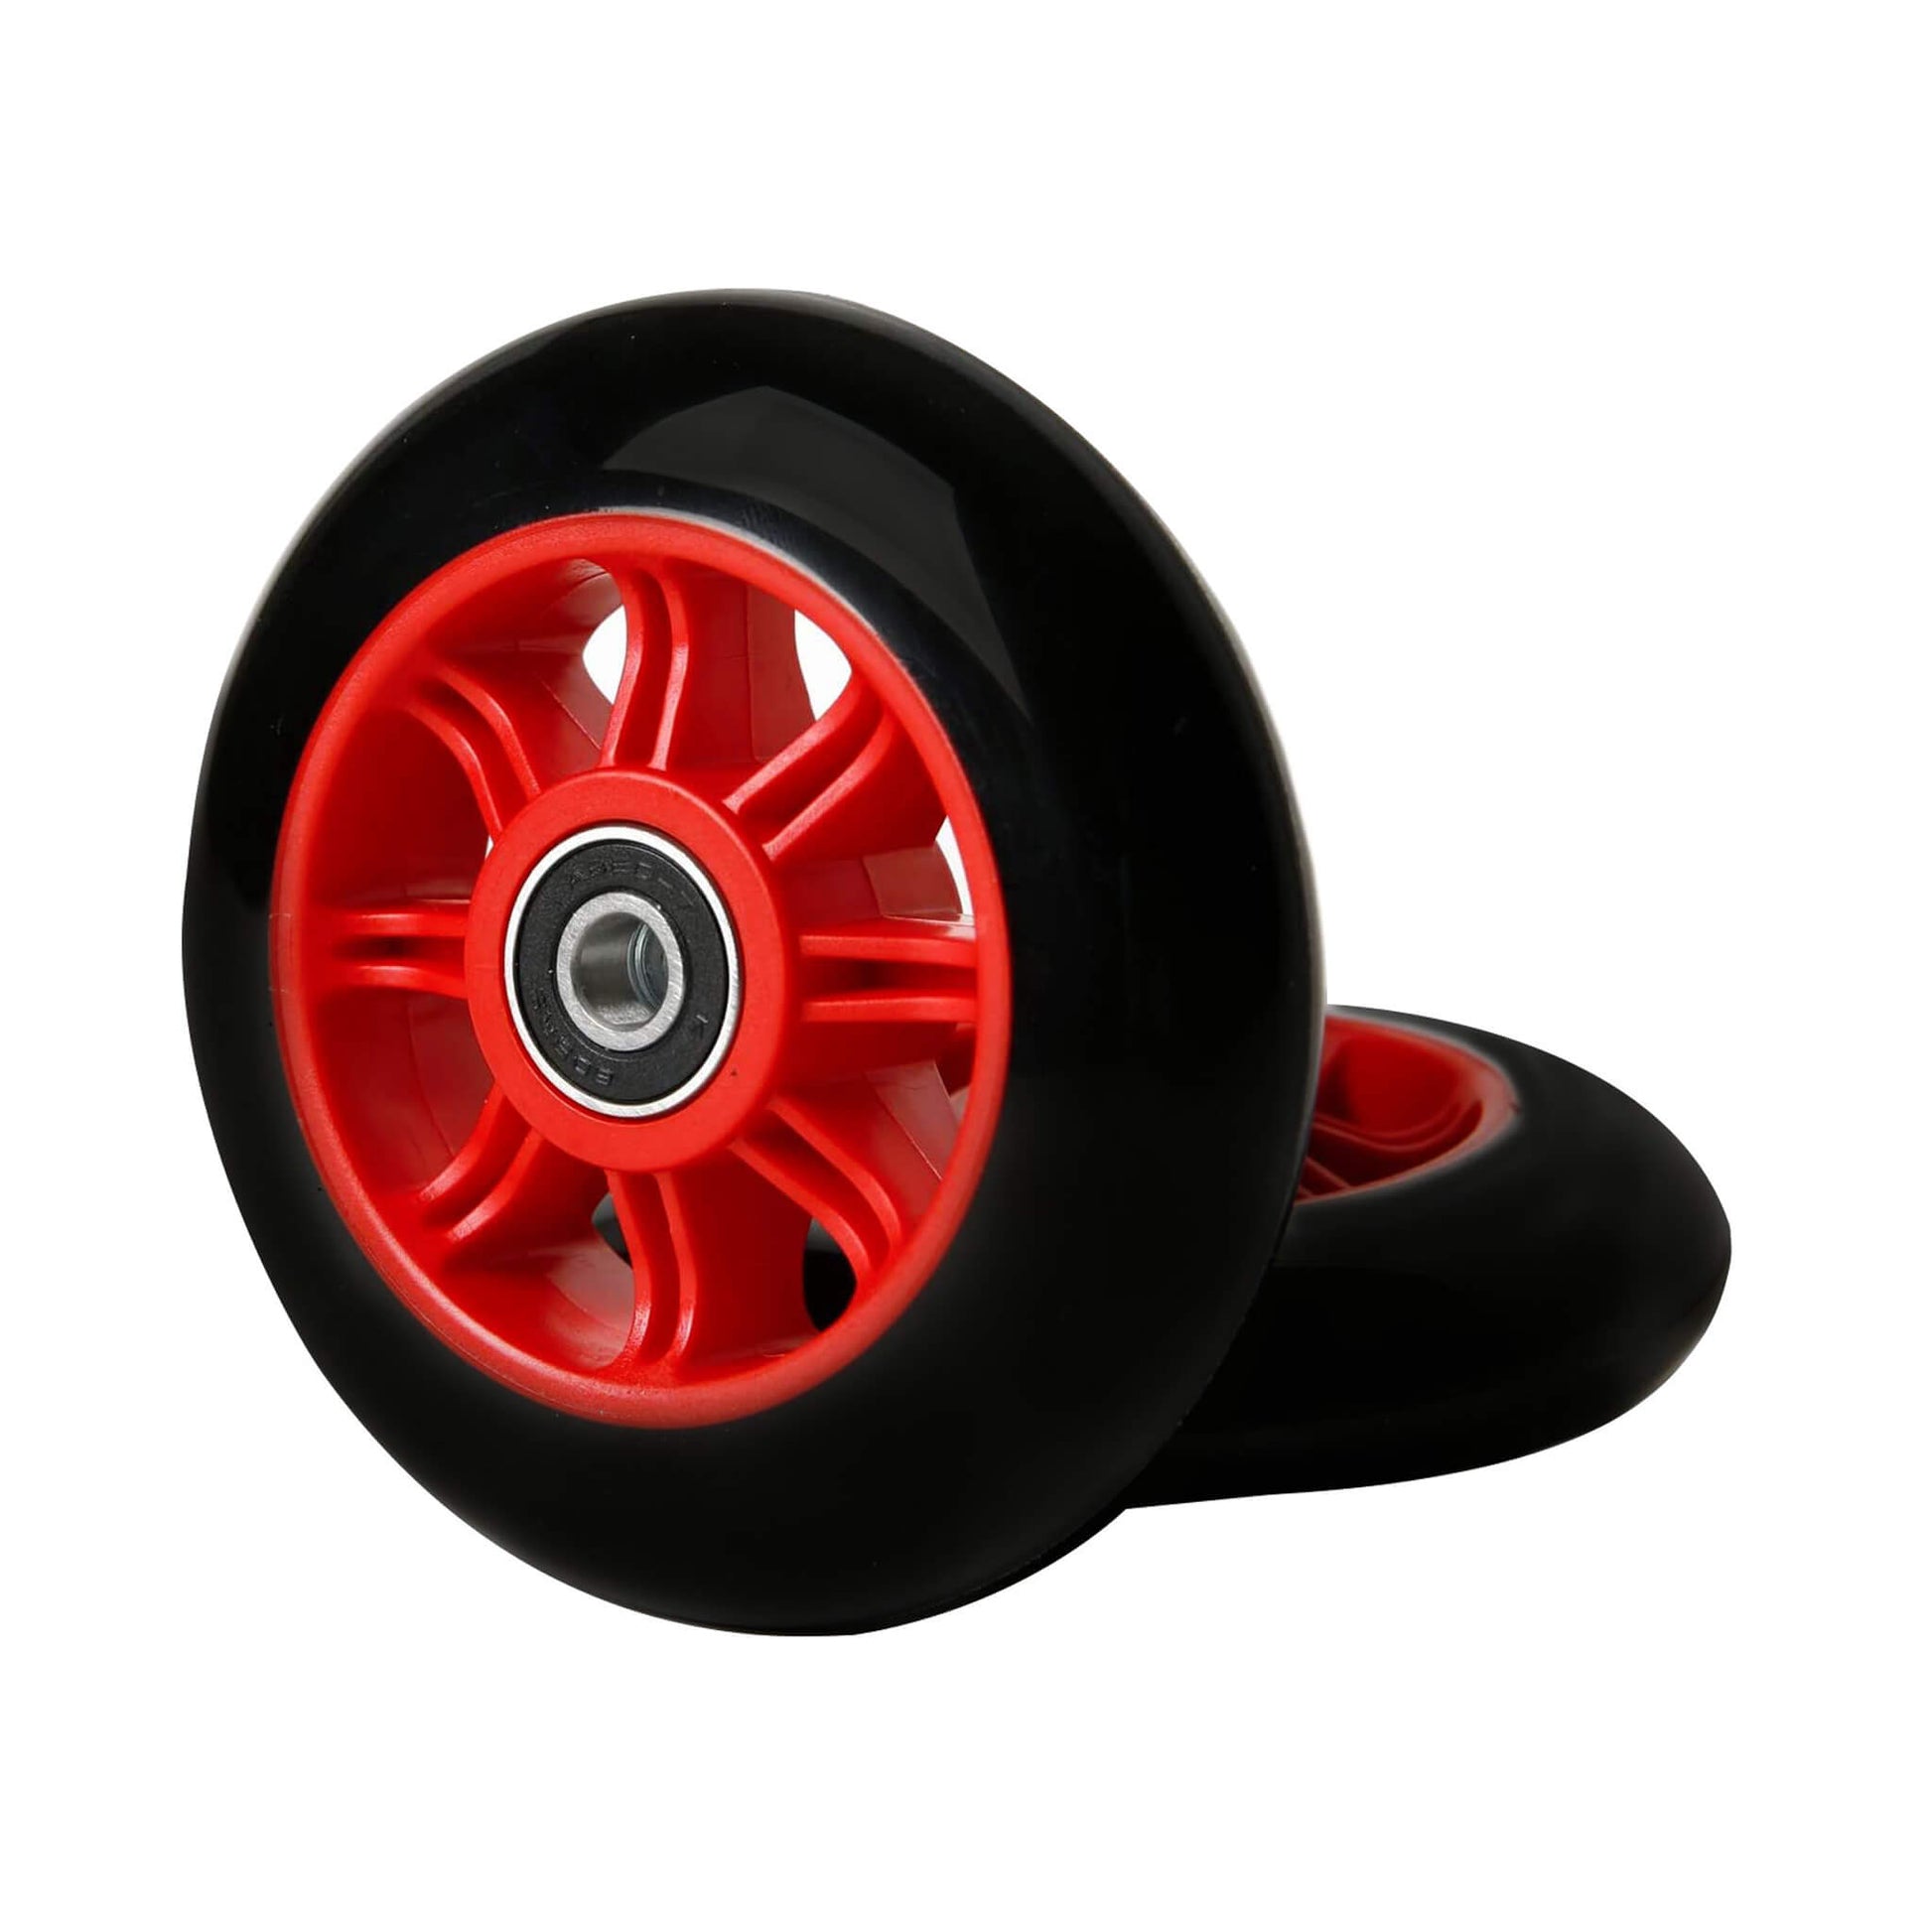 Freedare FREEDARE Scooter Wheels 100mm Pro Stunt Scooter Replacement Wheels  with ABEC Bearings(Blue, Set of 2)